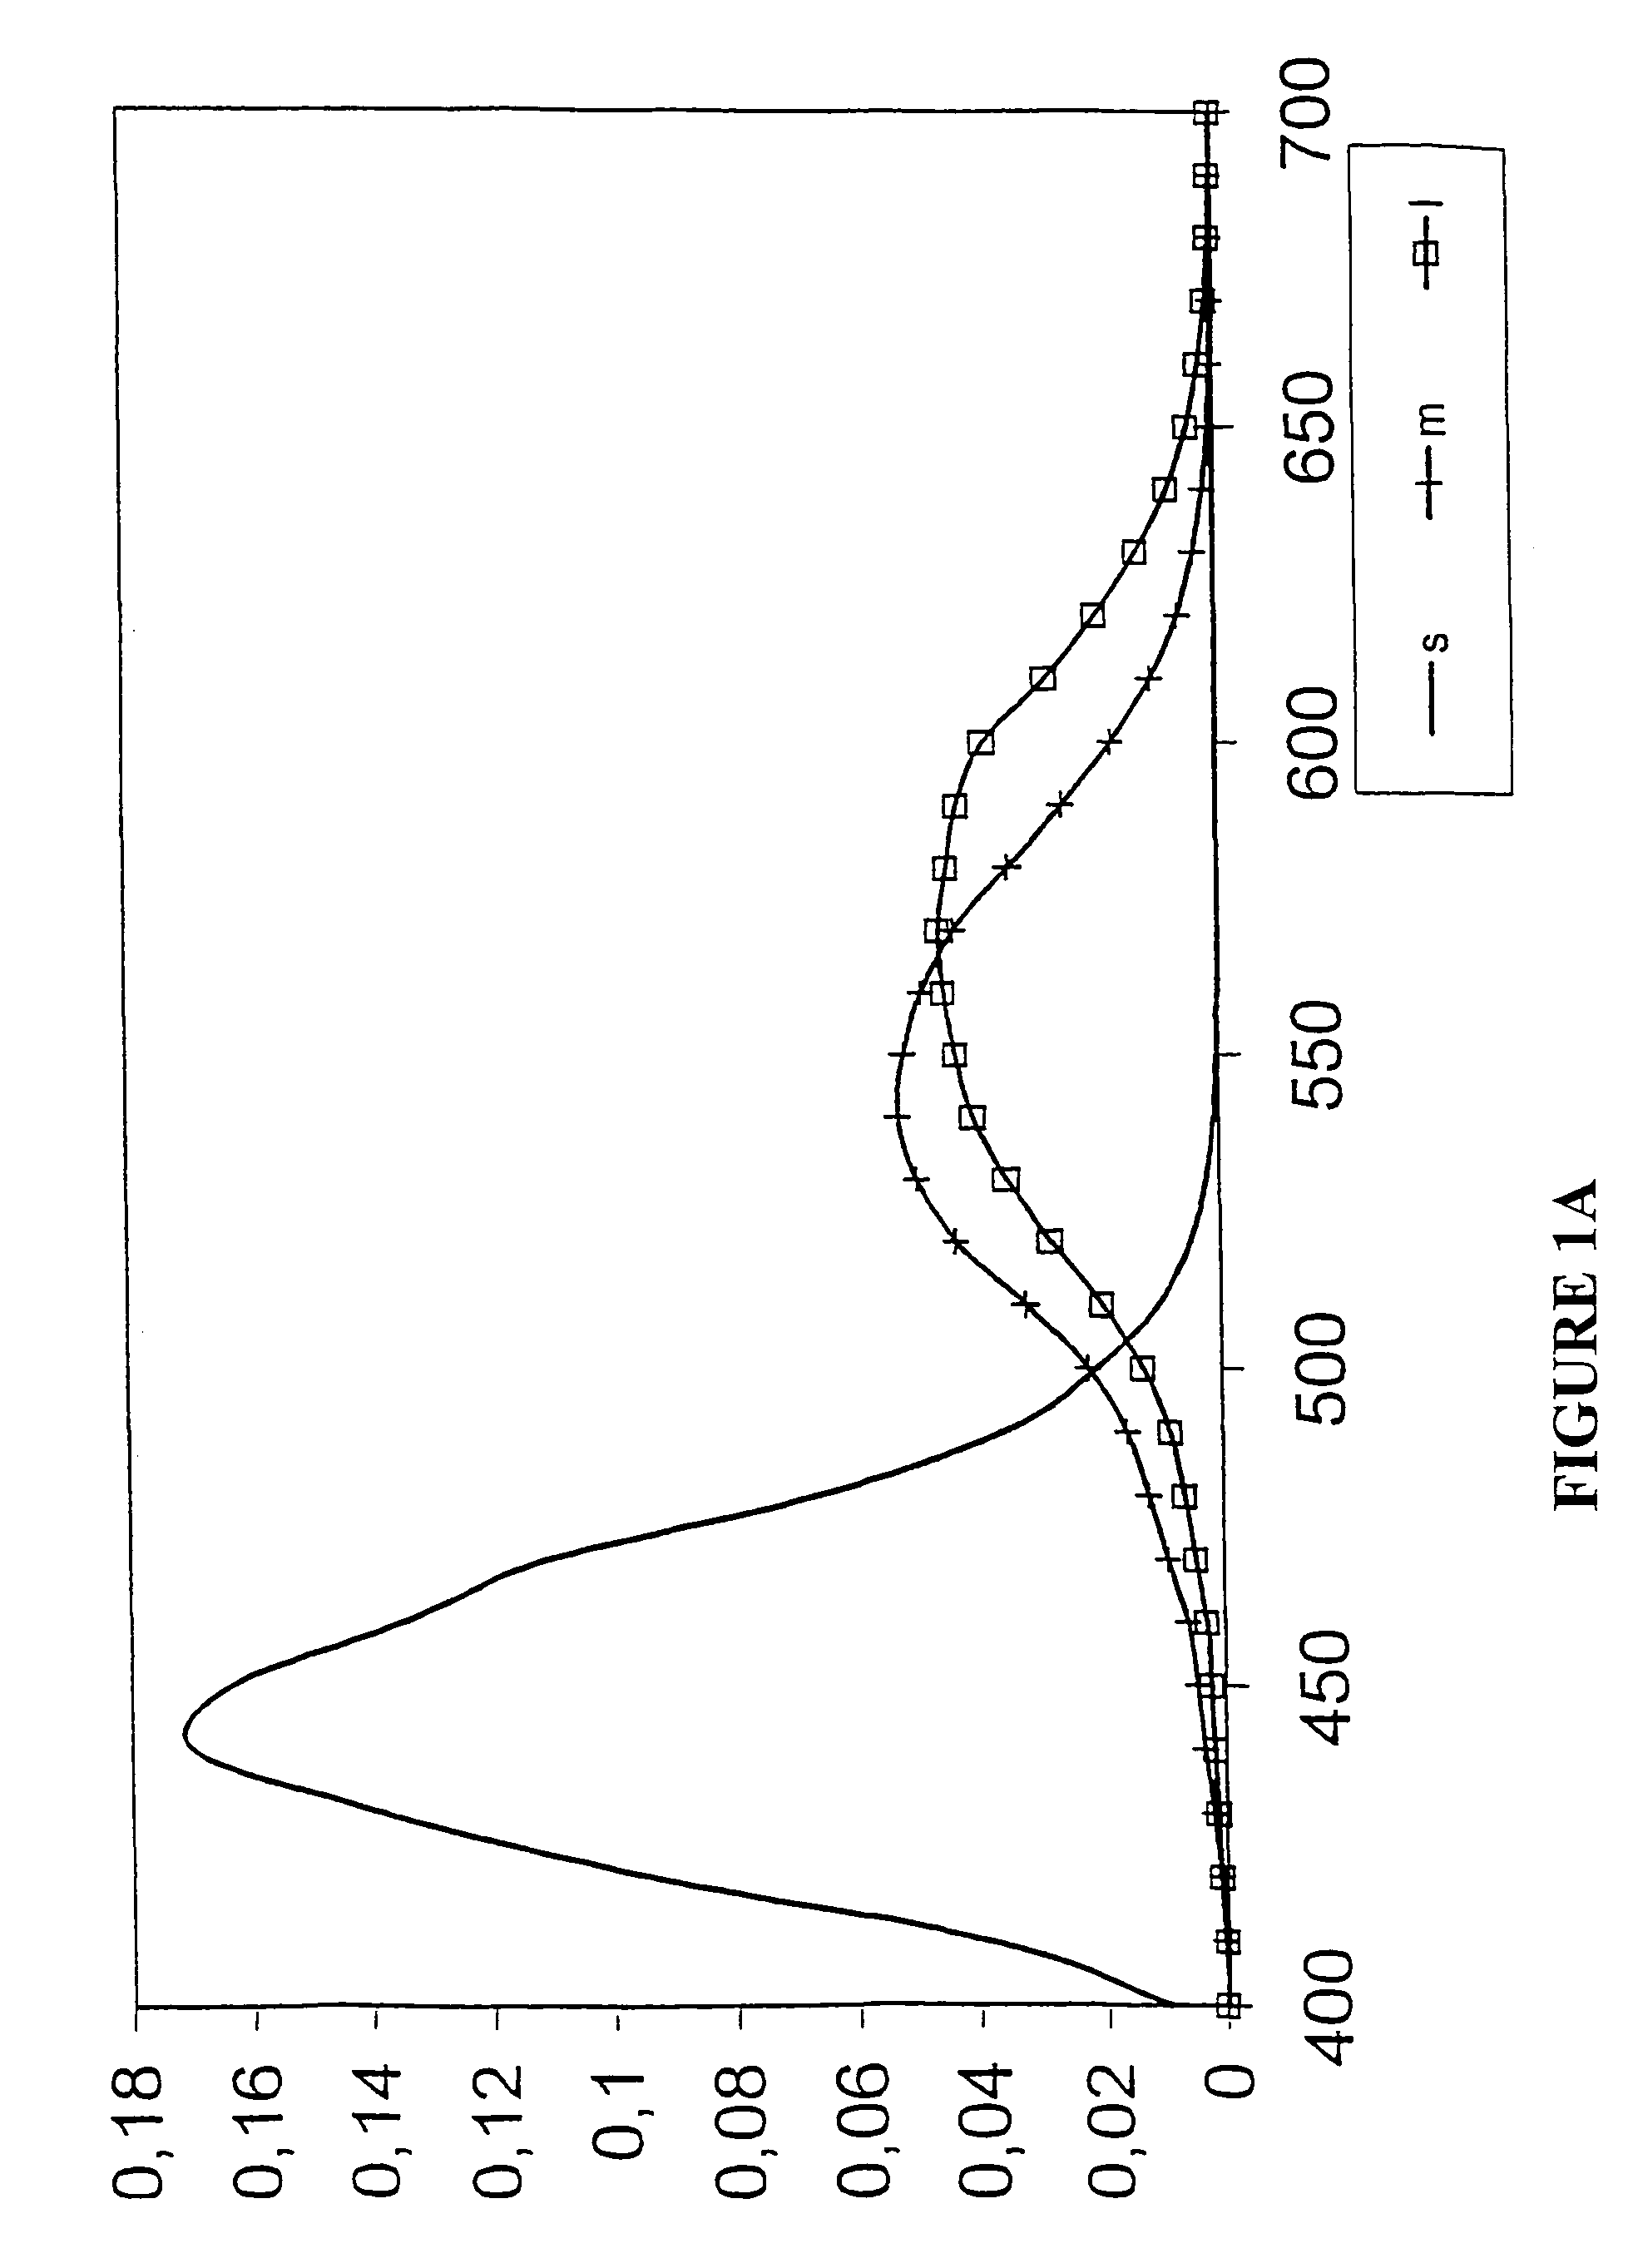 Method for designing color filters which improve or modify color vision of human eye, and color filter means designed by the method